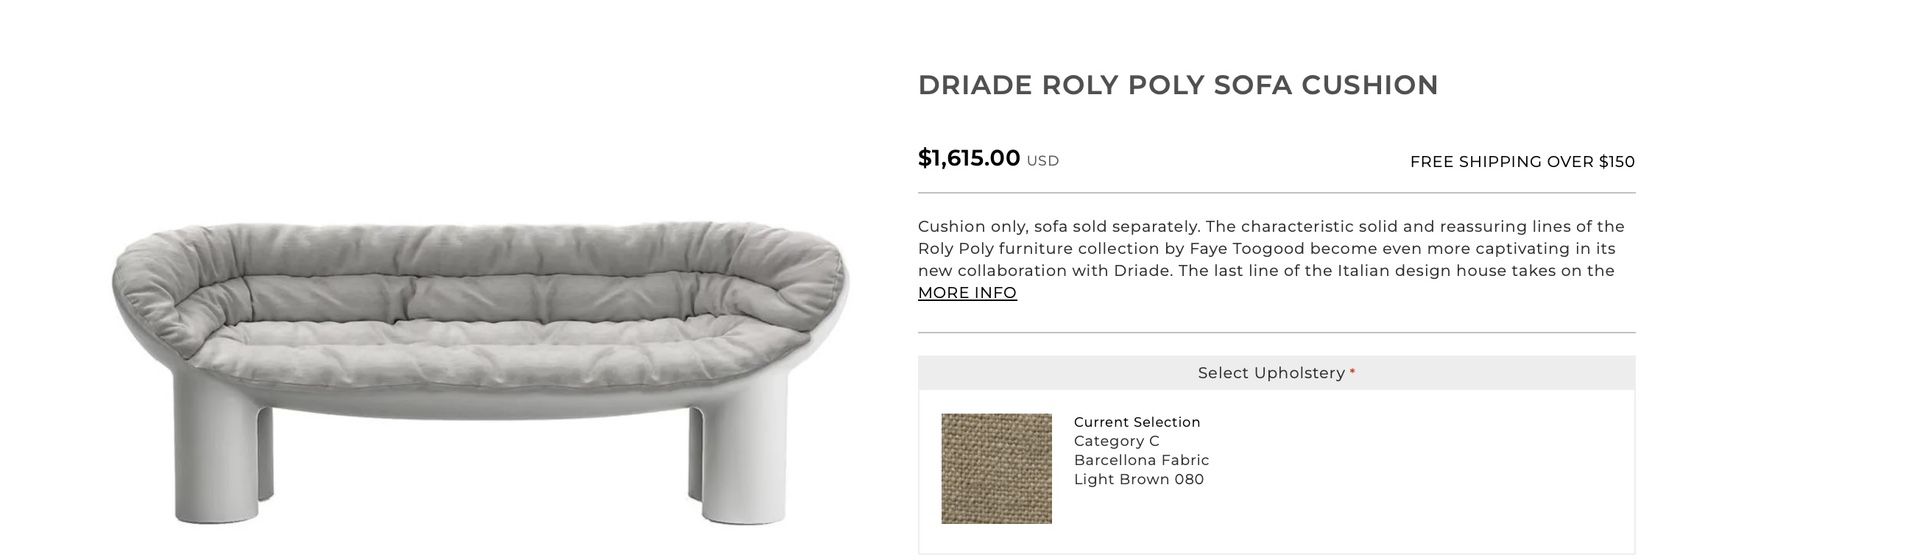 Driade Roly Poly Chair Cushion Sofa (Off White Color)